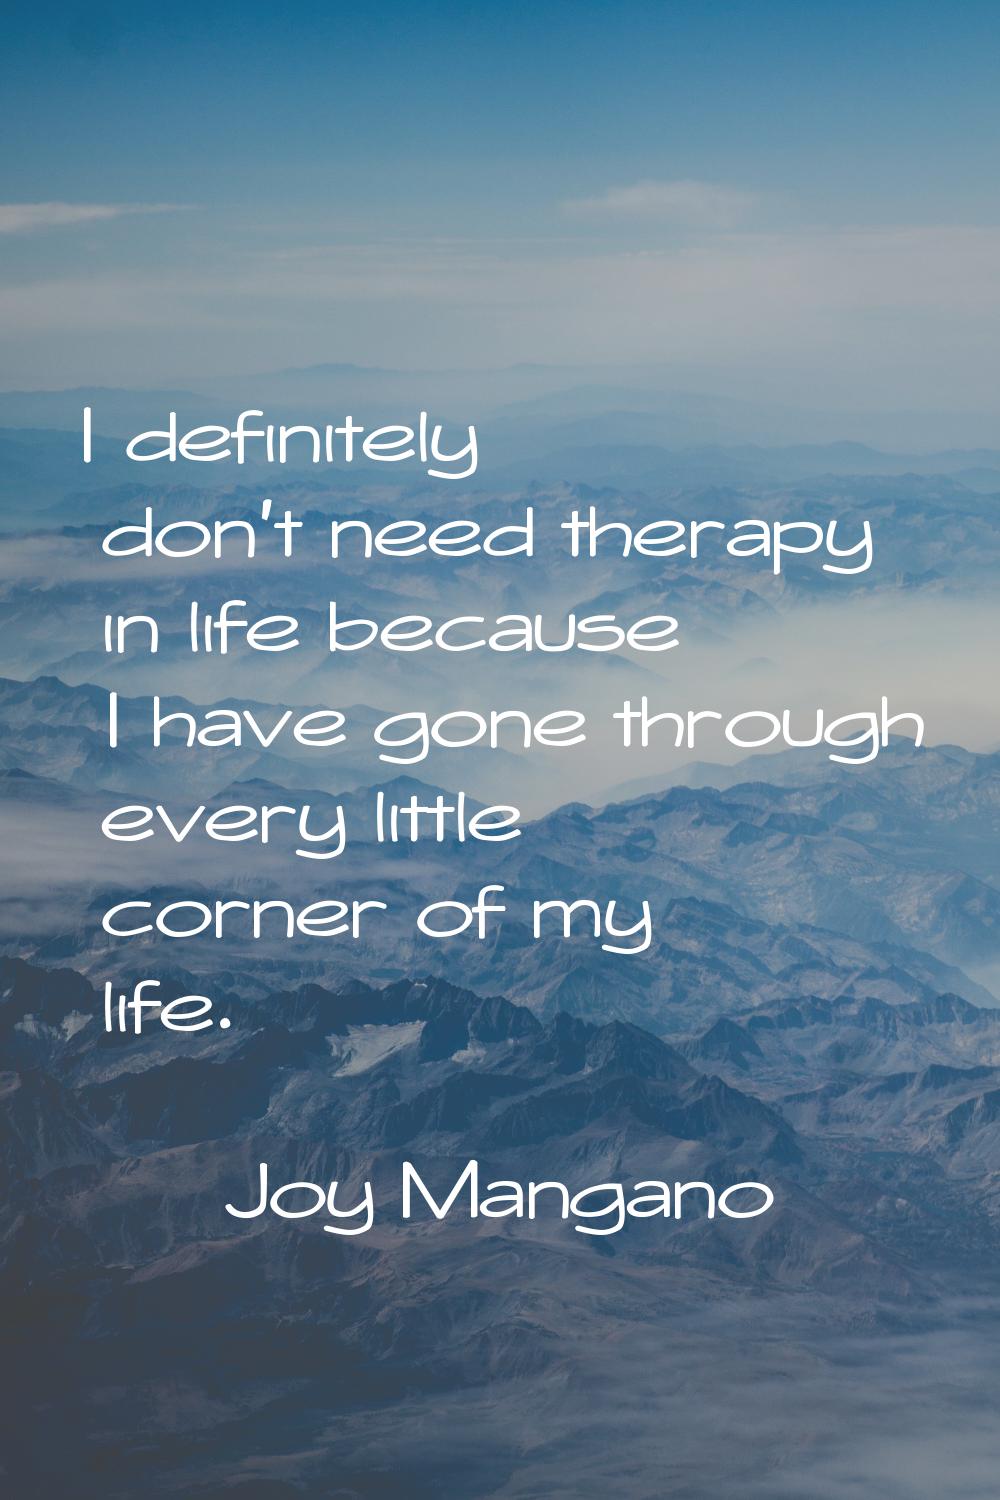 I definitely don't need therapy in life because I have gone through every little corner of my life.